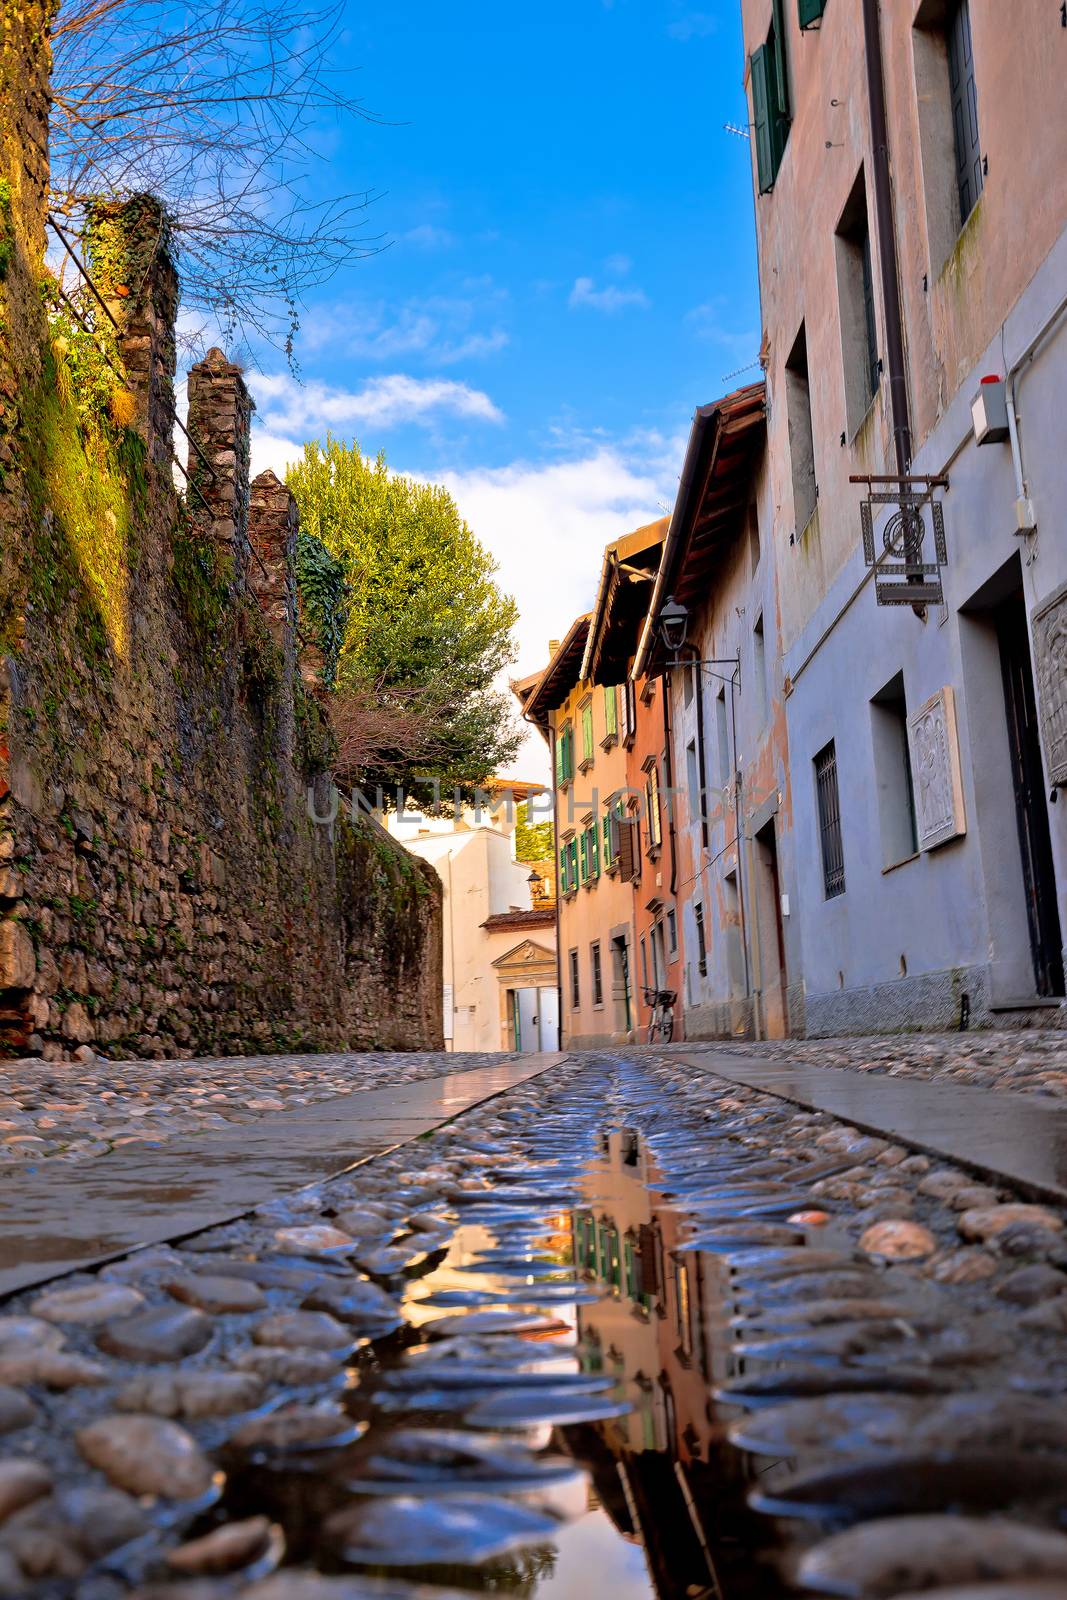 Colorful cobbled street of Cividale del Friuli by xbrchx